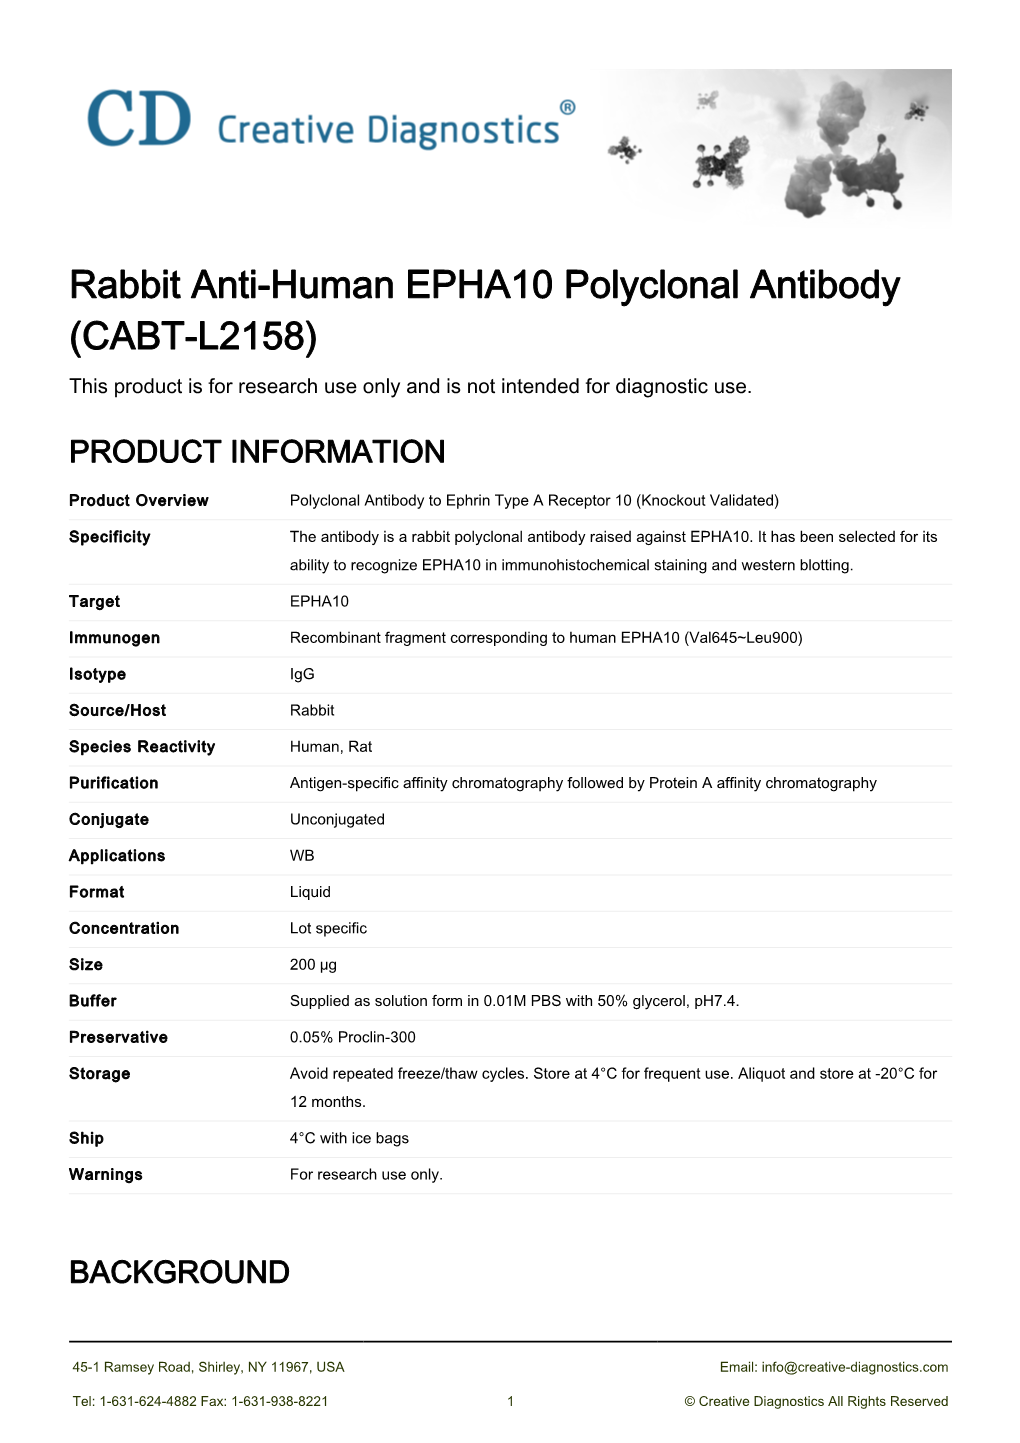 Rabbit Anti-Human EPHA10 Polyclonal Antibody (CABT-L2158) This Product Is for Research Use Only and Is Not Intended for Diagnostic Use